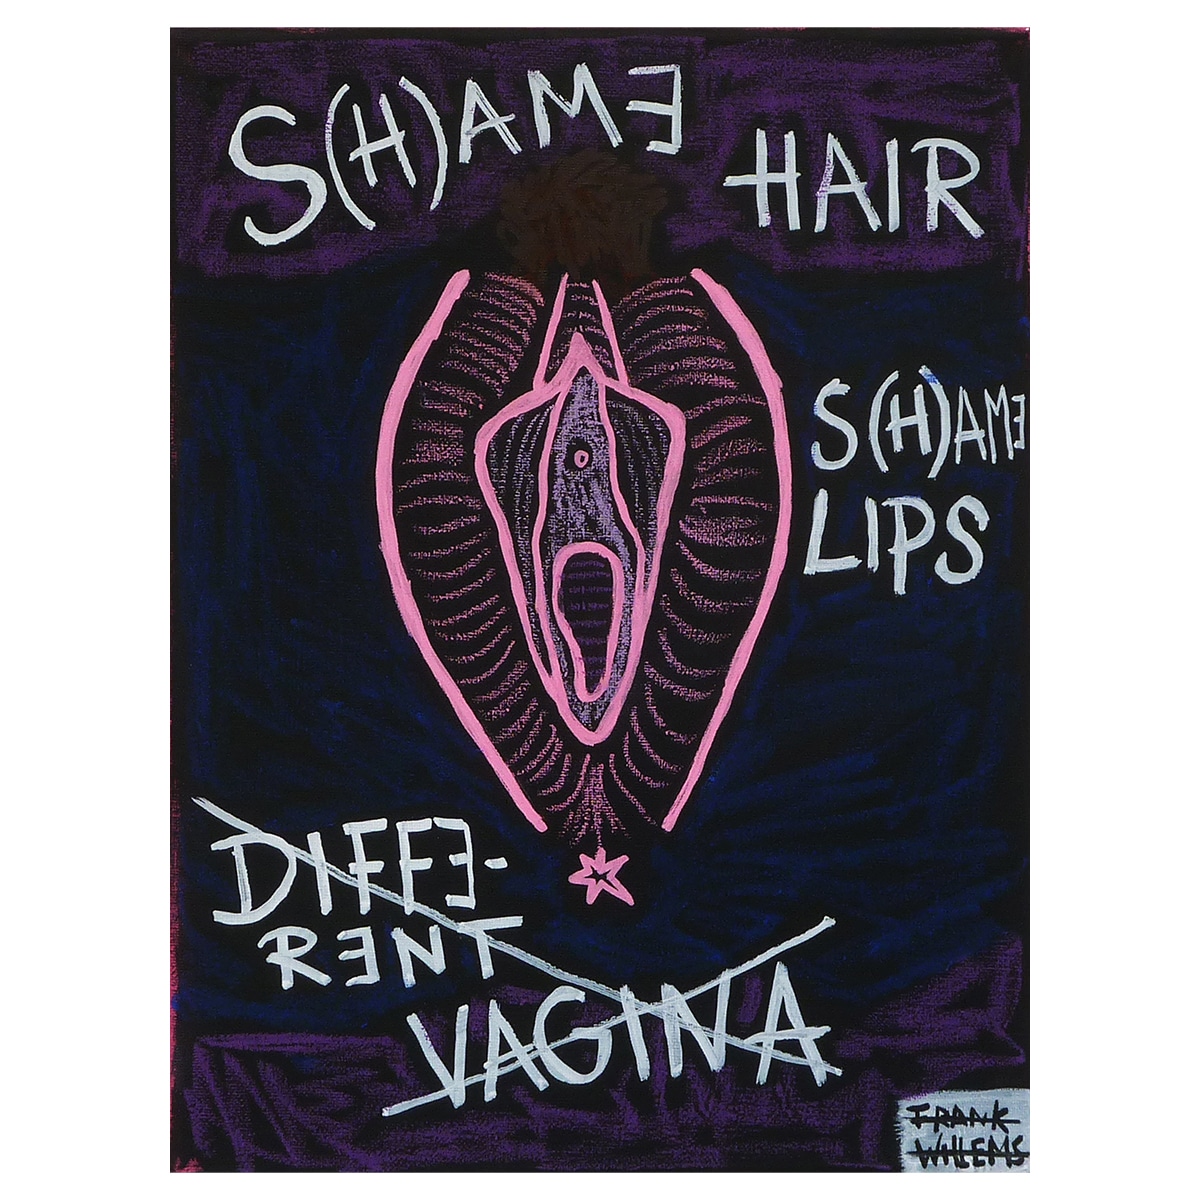 S(H)AME HAIR, S(H)AME LIPS, DIFFERENT VAGINA - Frank Willems